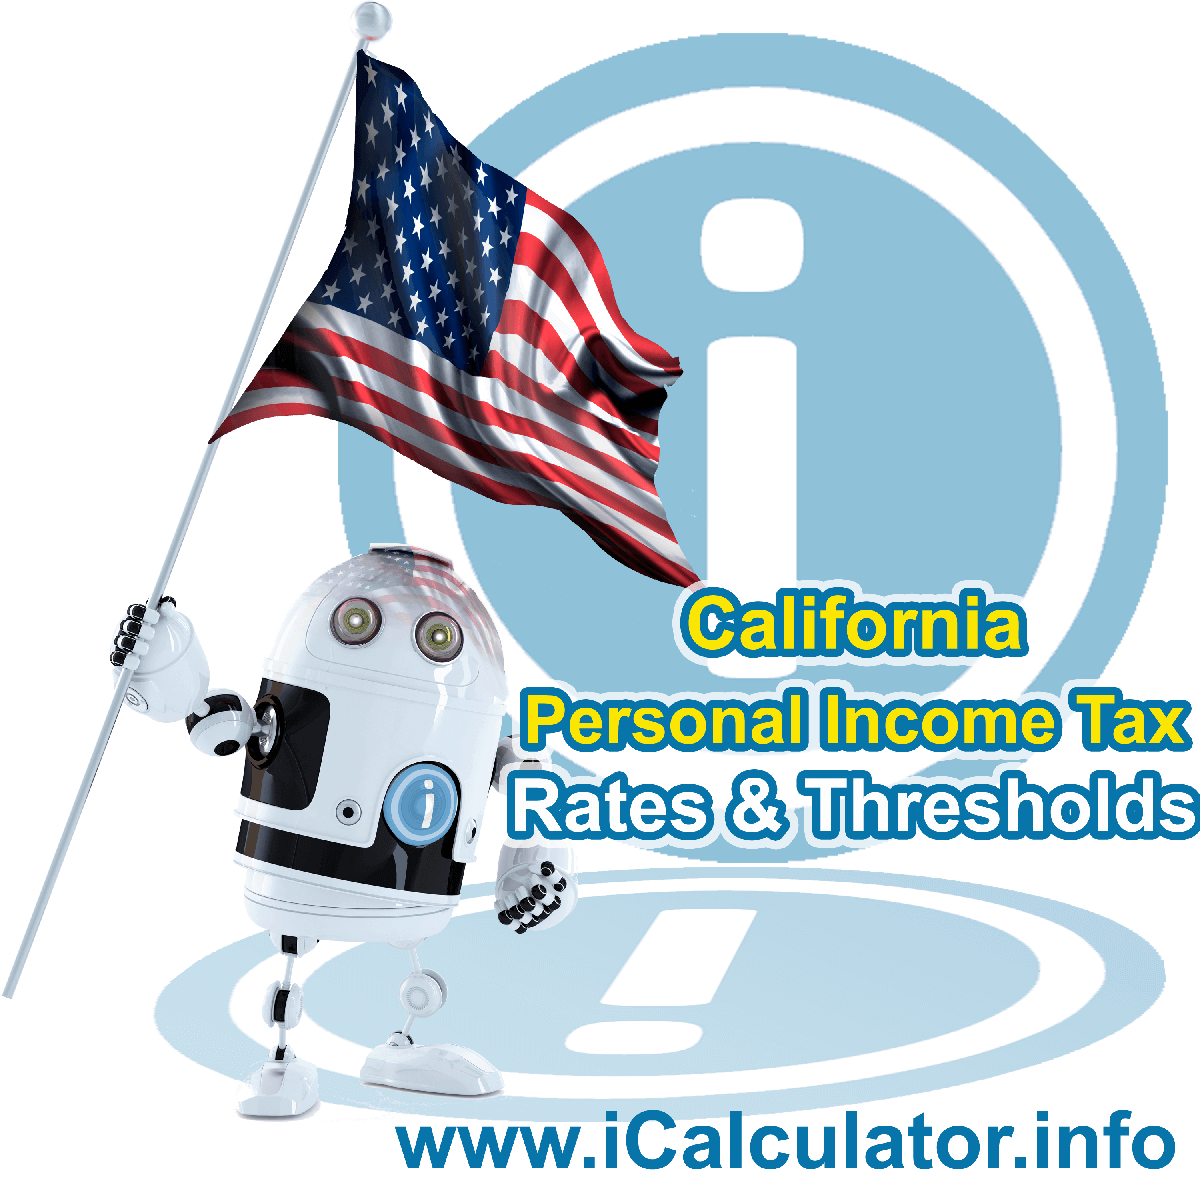 California State Tax Tables 2021. This image displays details of the California State Tax Tables for the 2021 tax return year which is provided in support of the 2021 US Tax Calculator